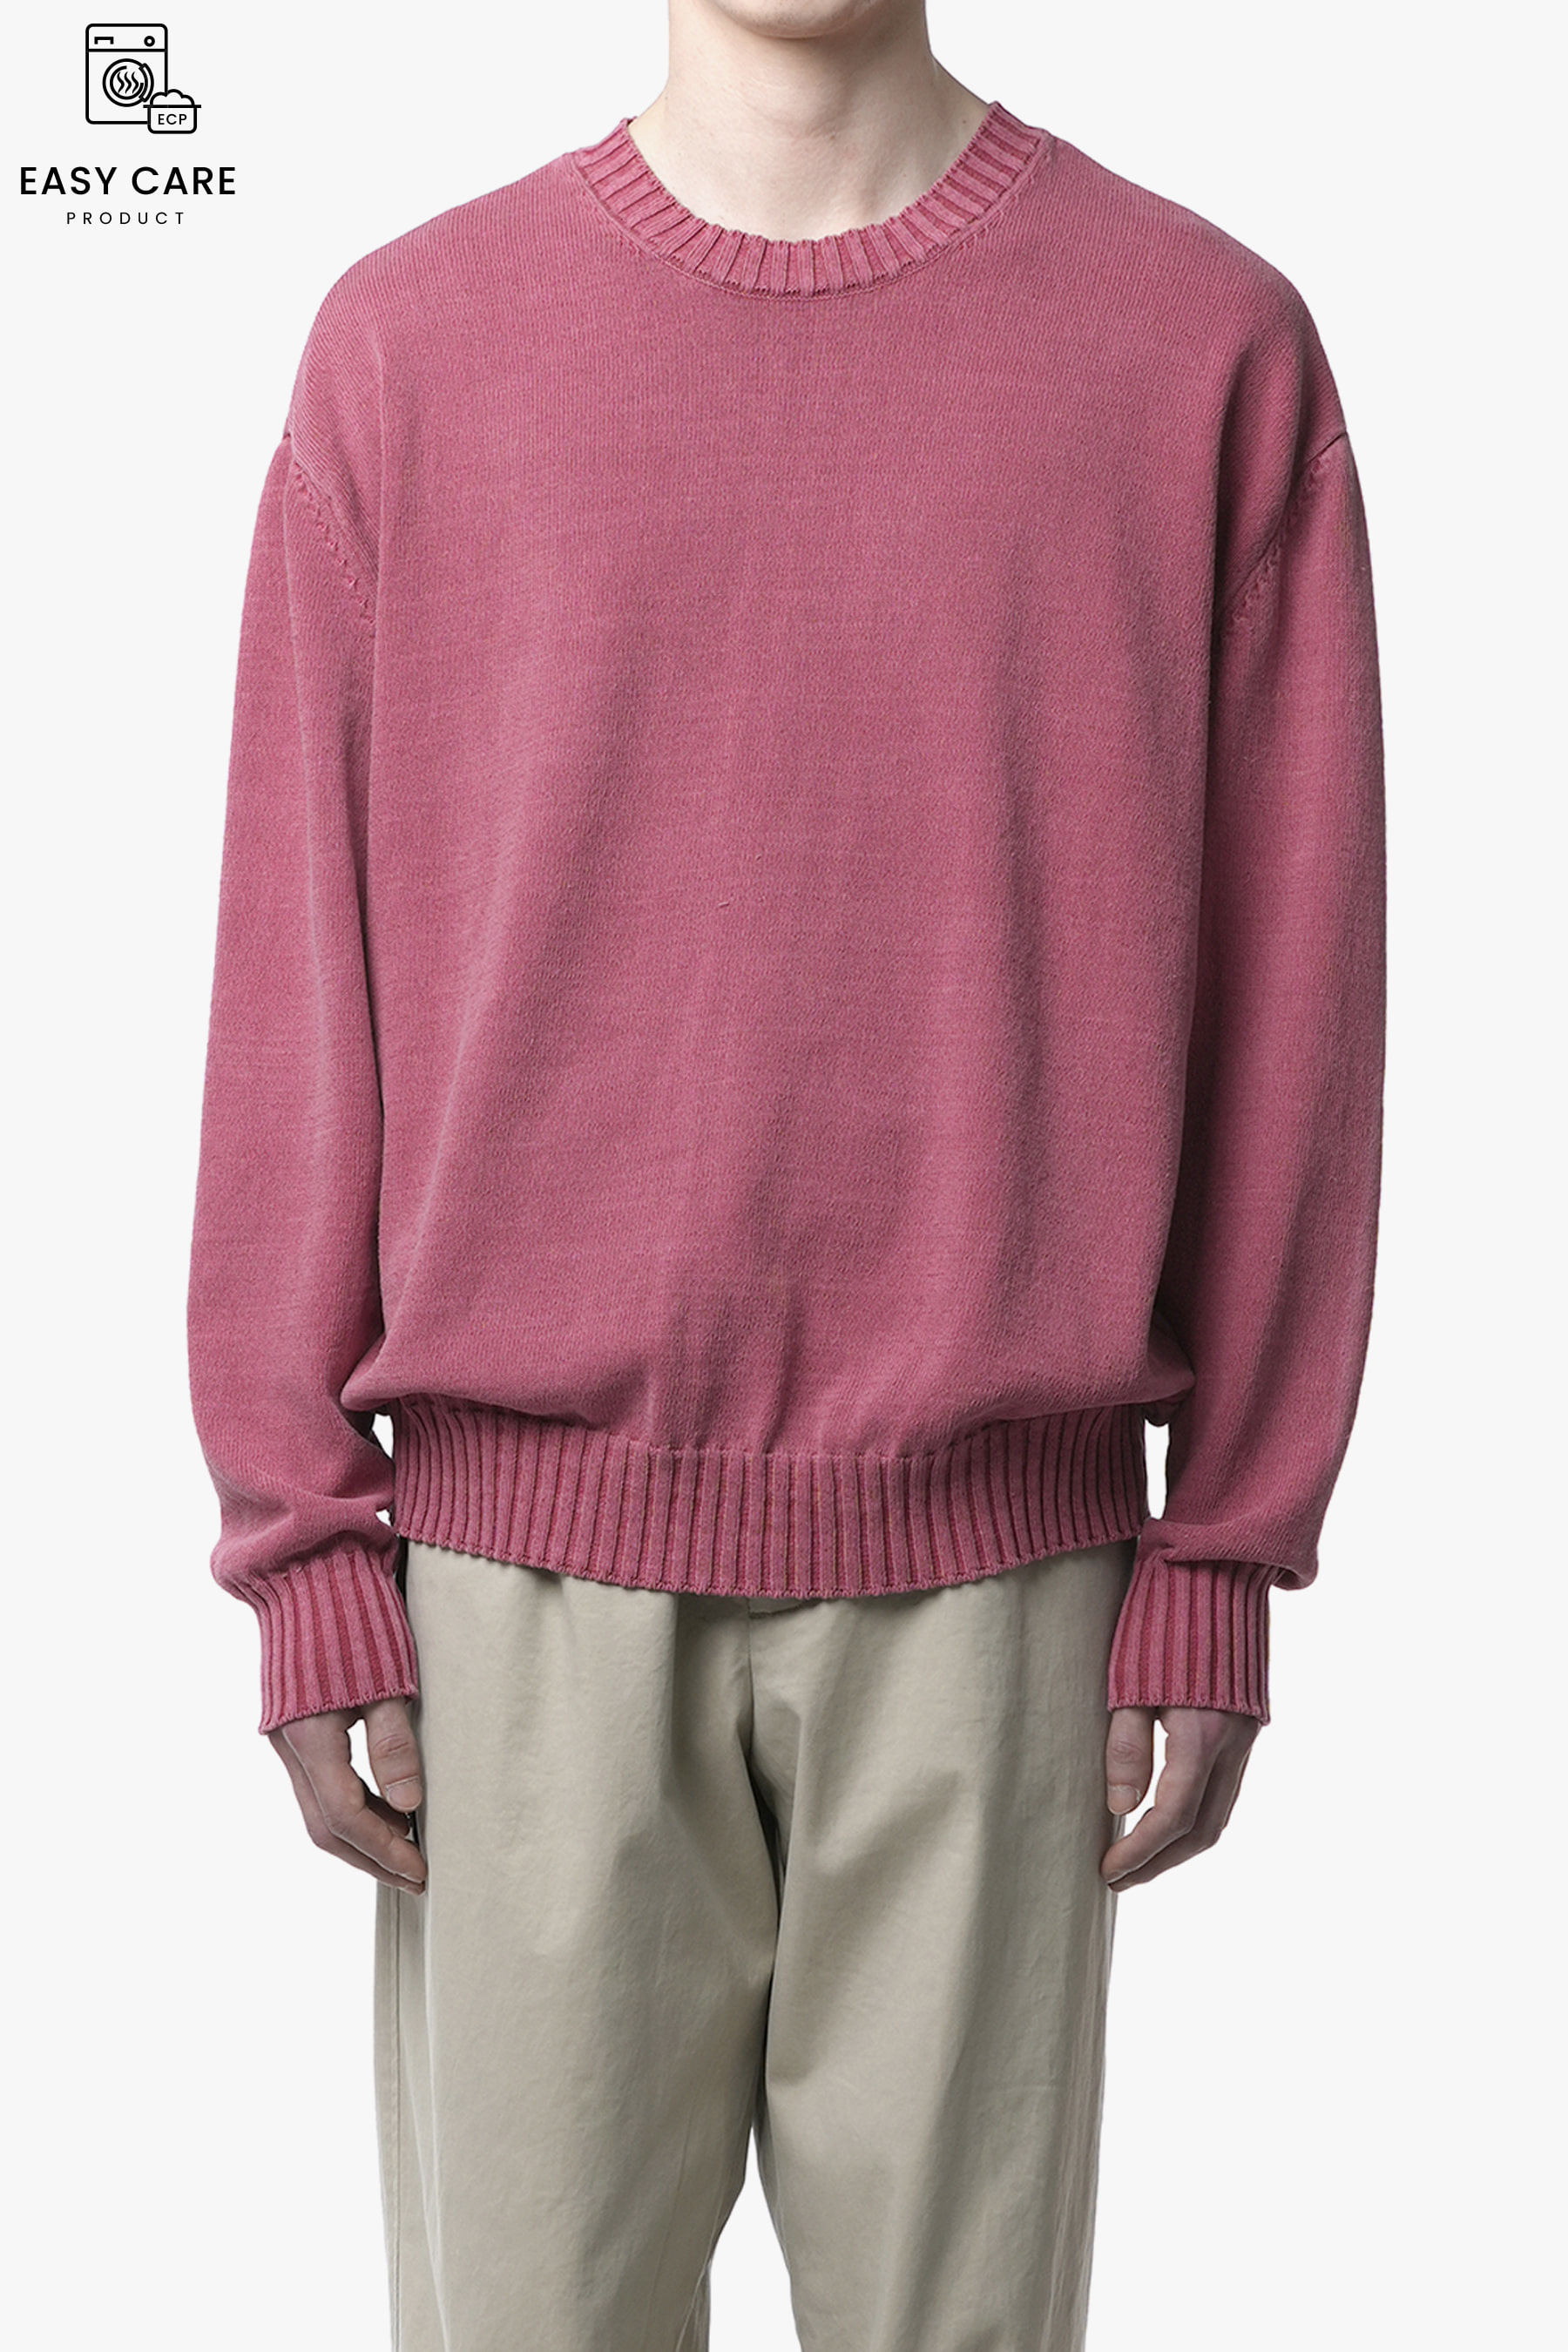 PINK OVER DYED CREW NECK COTTON KNIT (ECP GARMENT PROCESS)